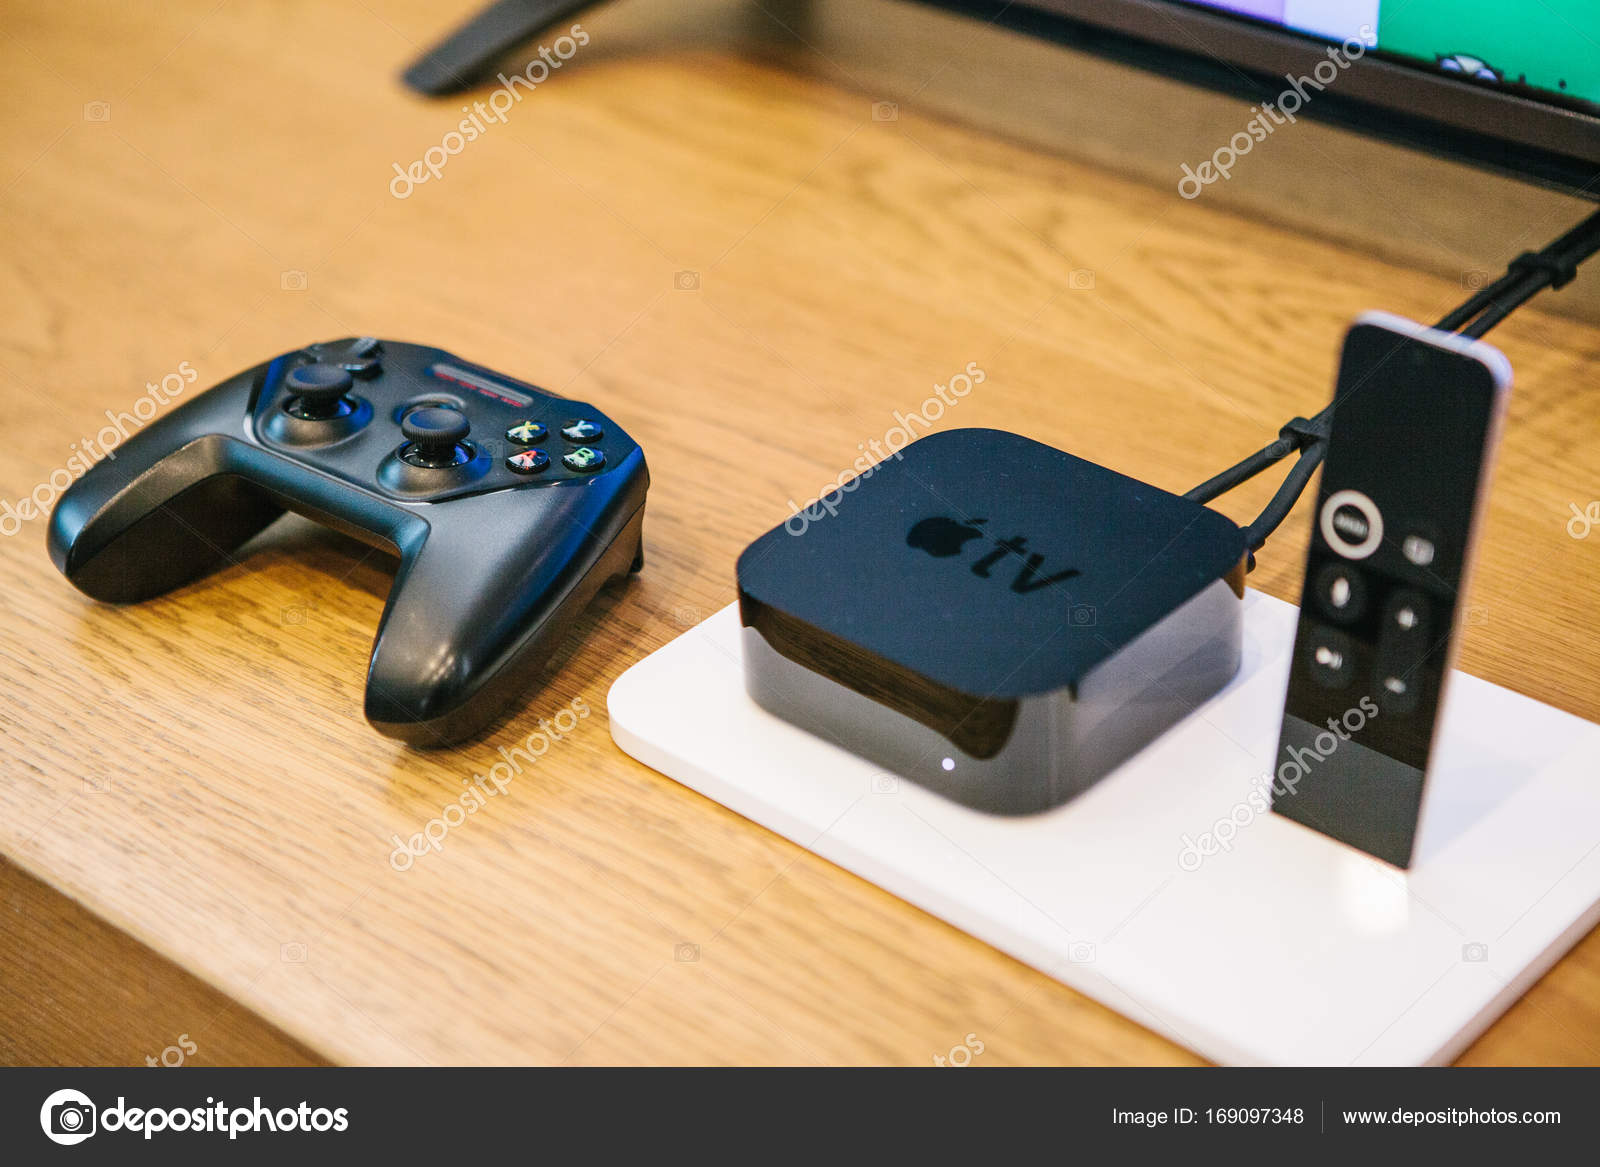 Berlin, 2, presentation of new products in the official Apple store. Modern advanced block Apple TV with a joystick and control panel lie on the table. – Stock Editorial